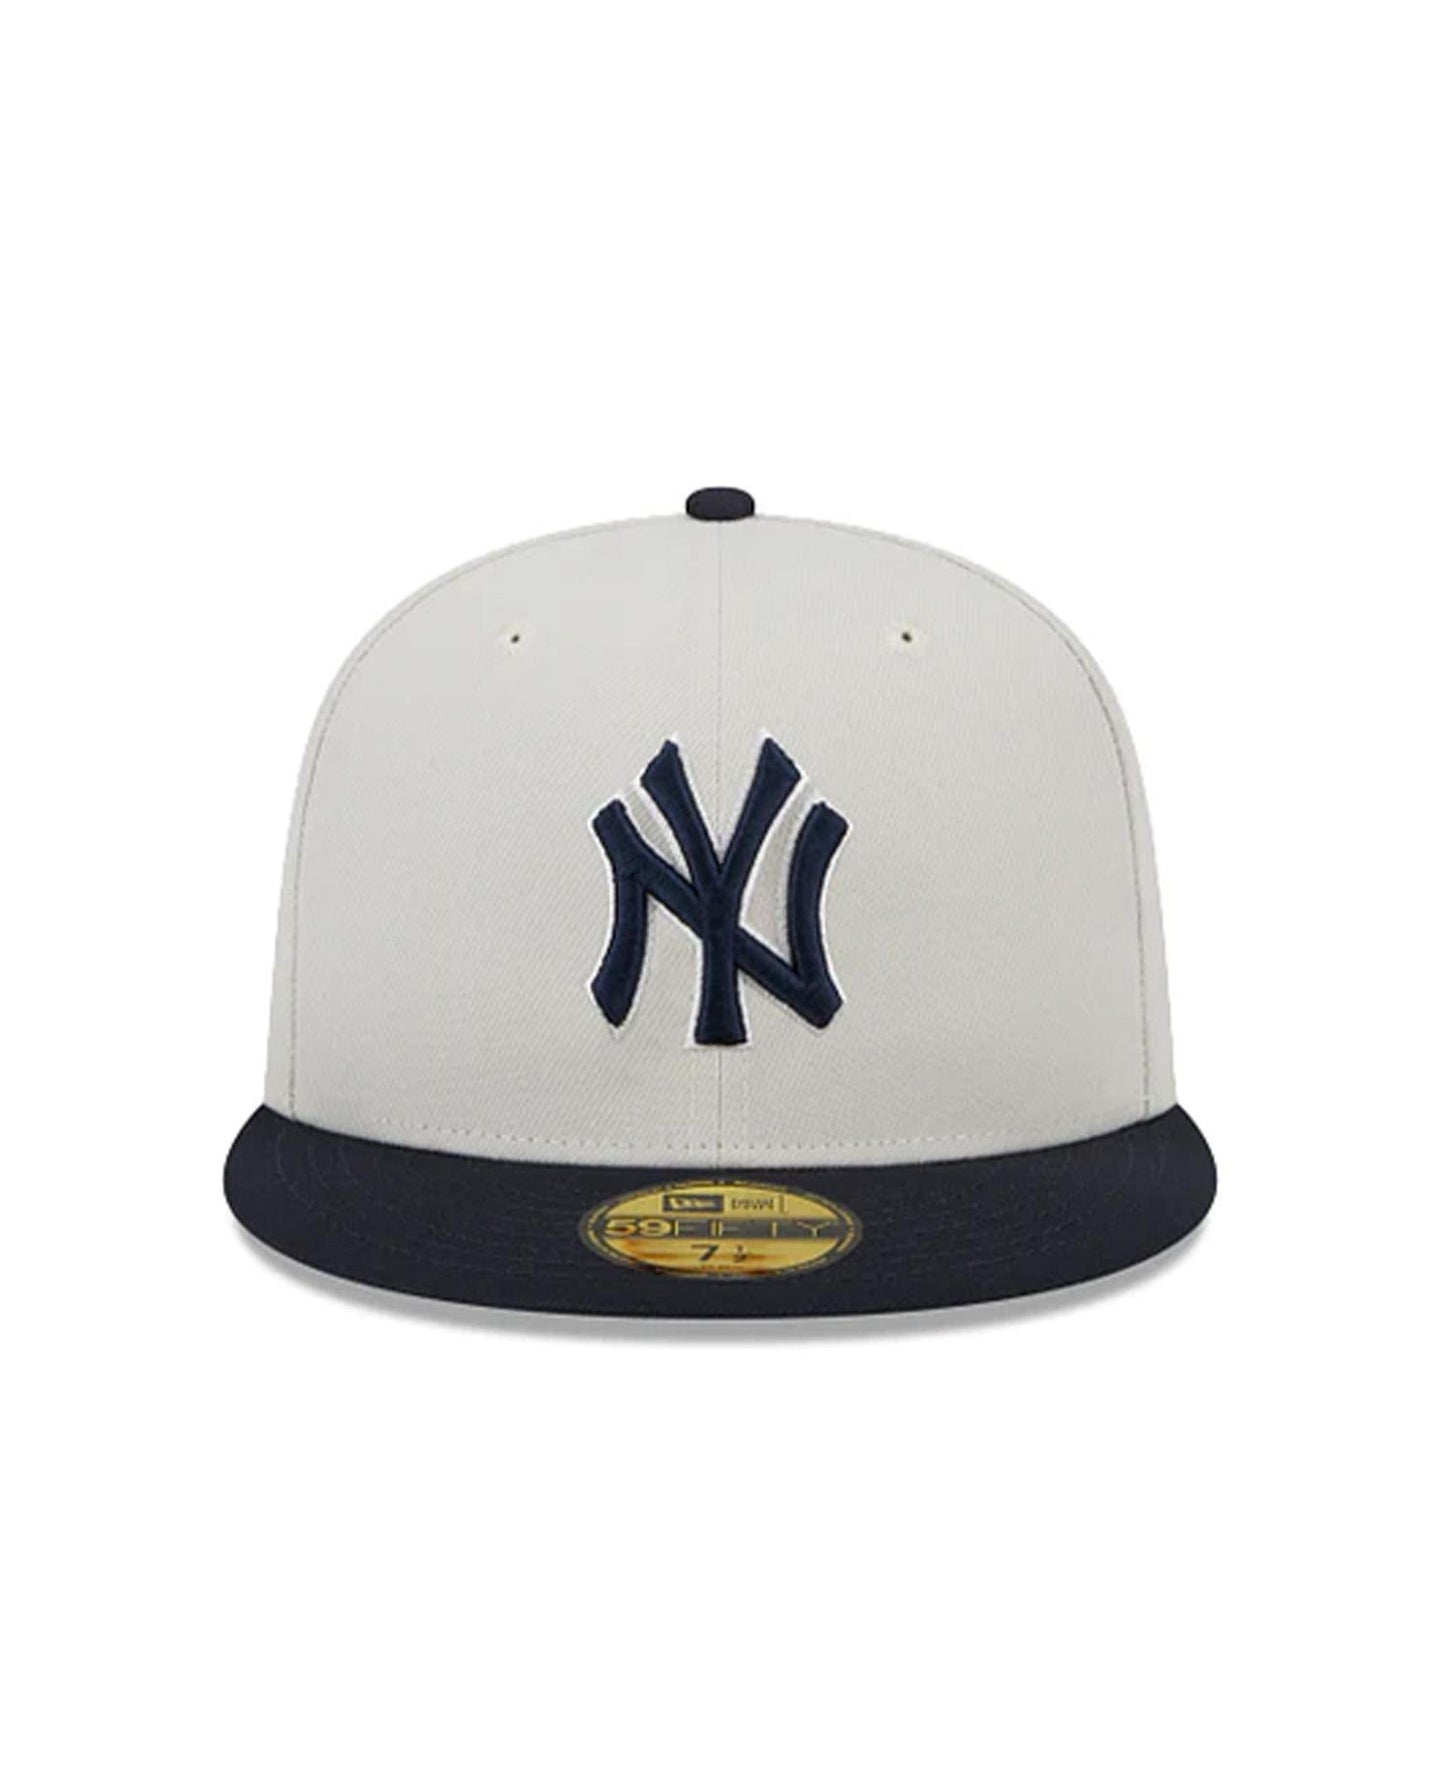 NIKE MLB New York YANKEES SCRIPT Baseball CAP HAT Embroider LOGO One Size  Fitted